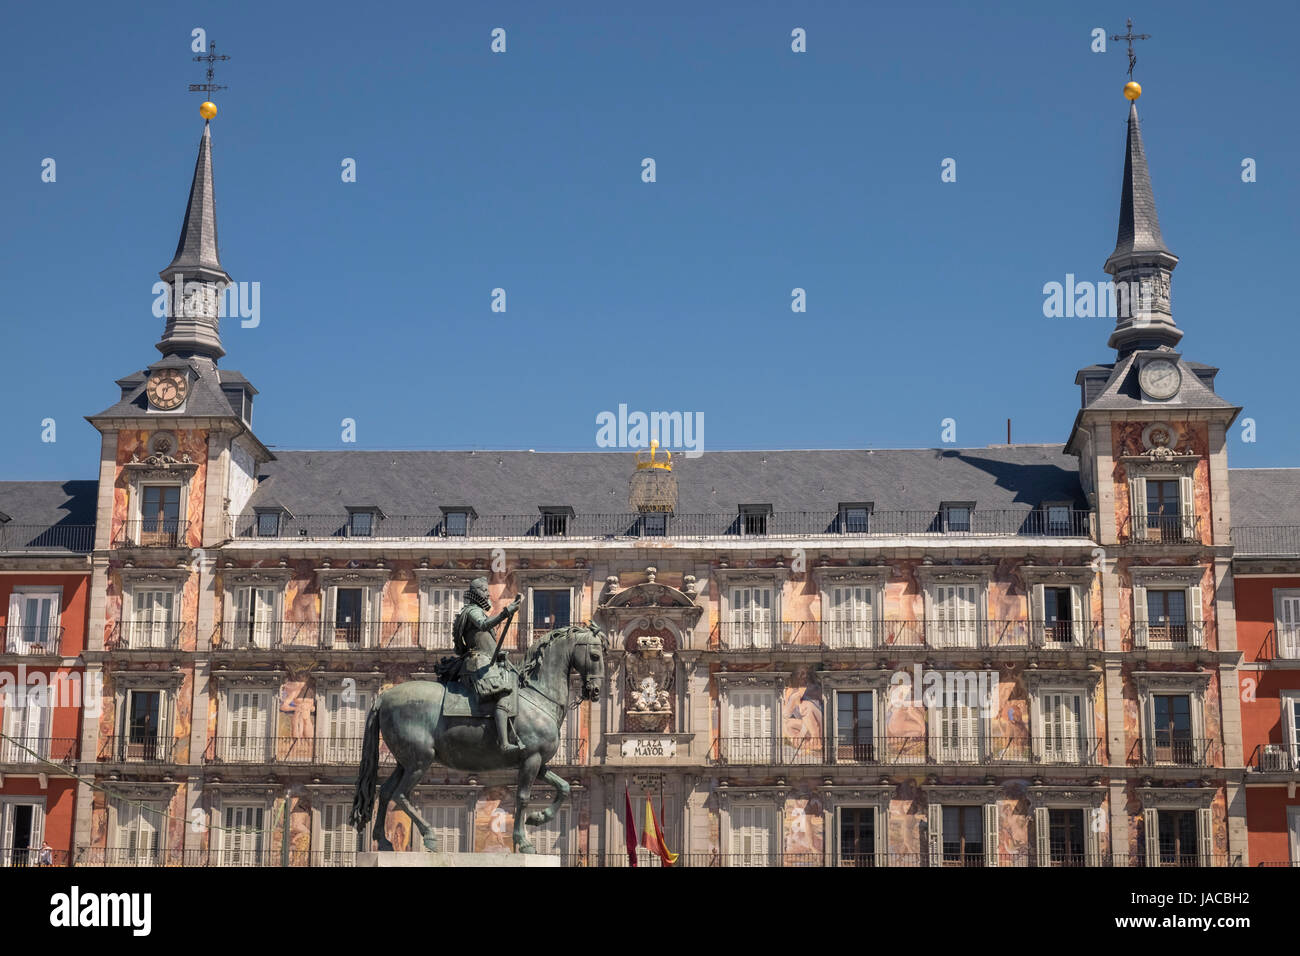 Bronze statue of King Philip III, surrounded by three storey houses with balconies, in the centre of Plaza Major, Madrid, Spain. Stock Photo